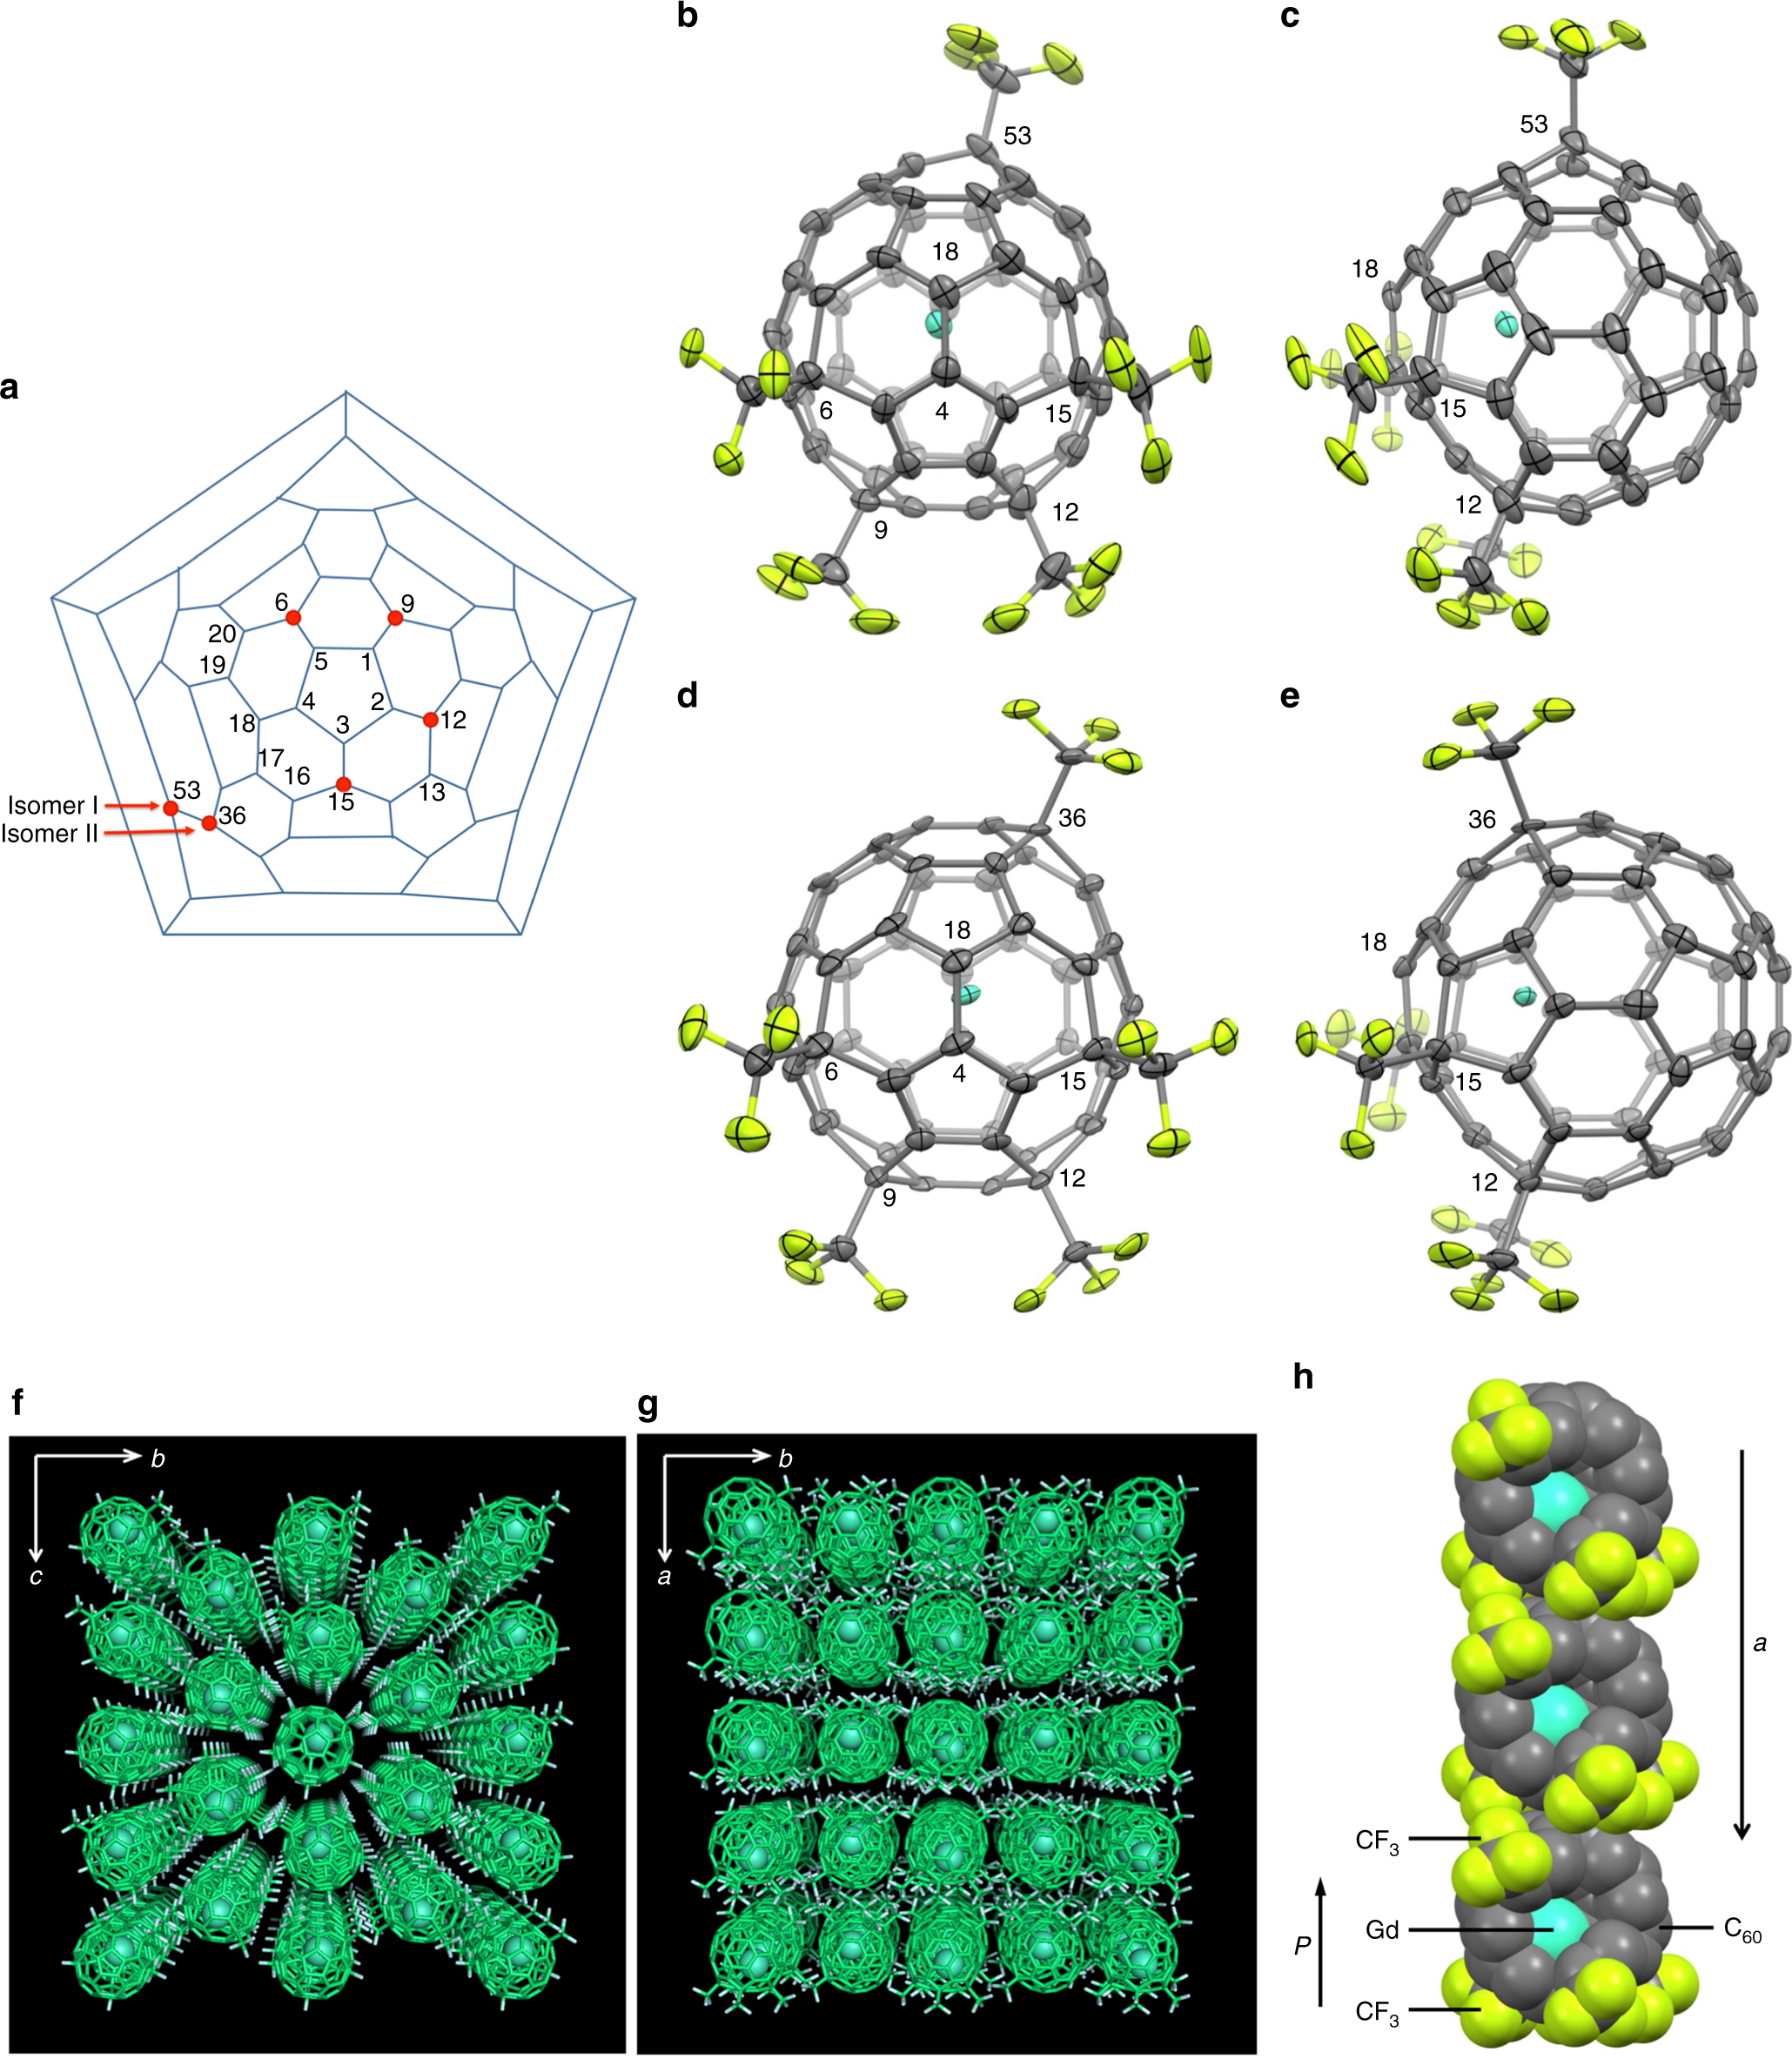 Crystalline functionalized endohedral metallofullerides | Communications